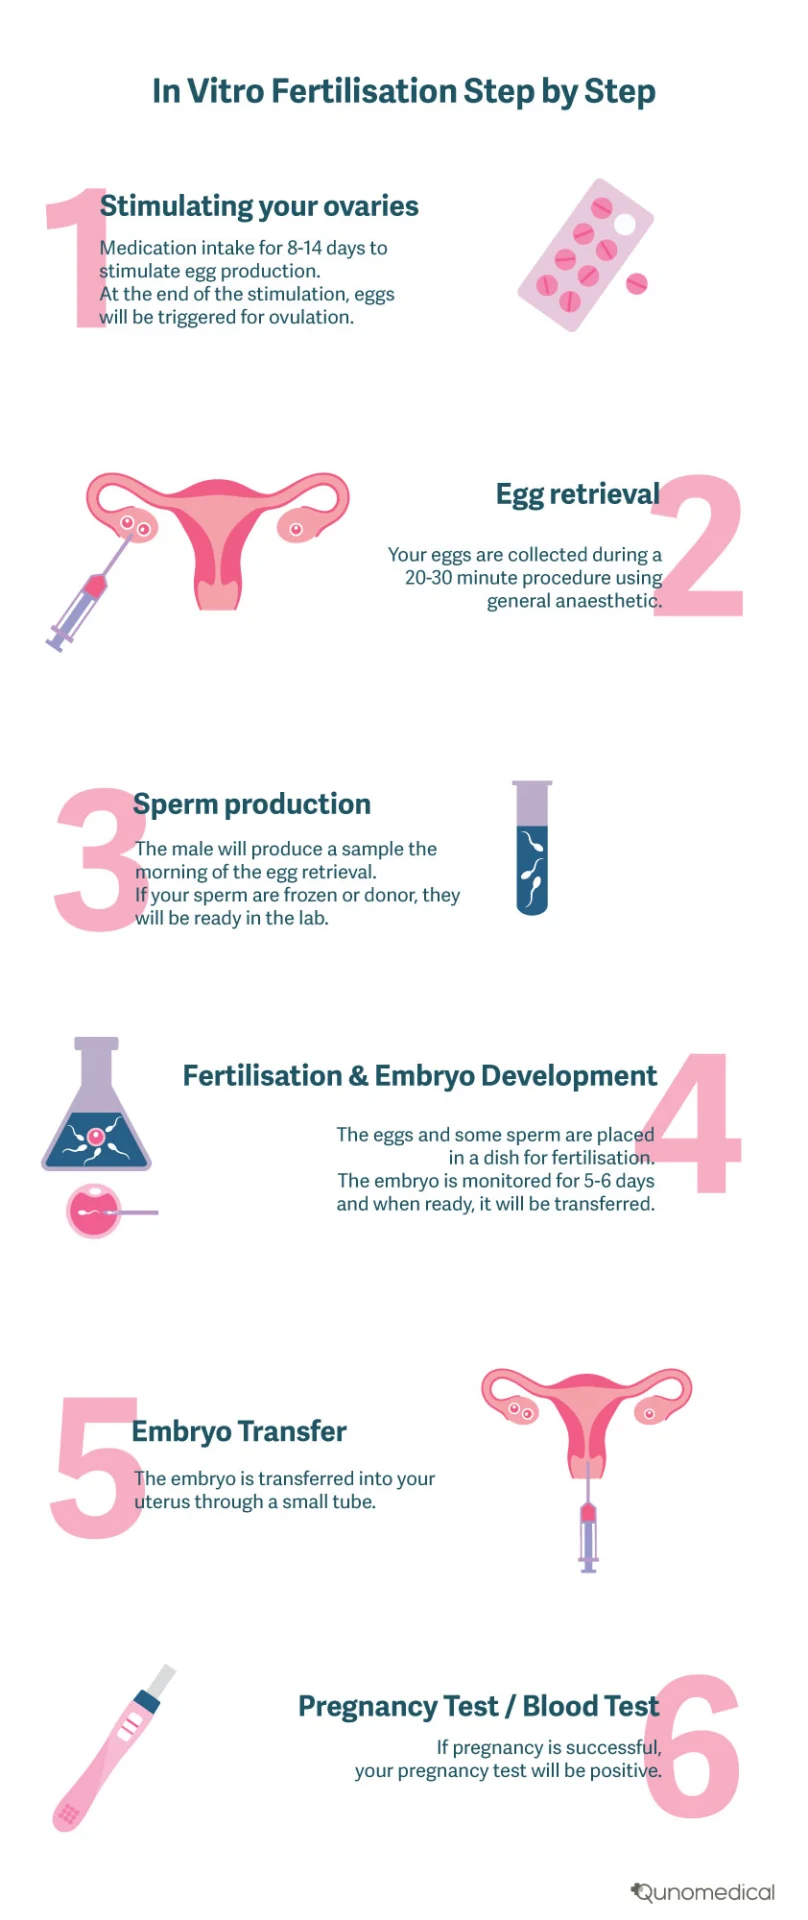 In-vitro-fertilisation-step-by-step-infographic